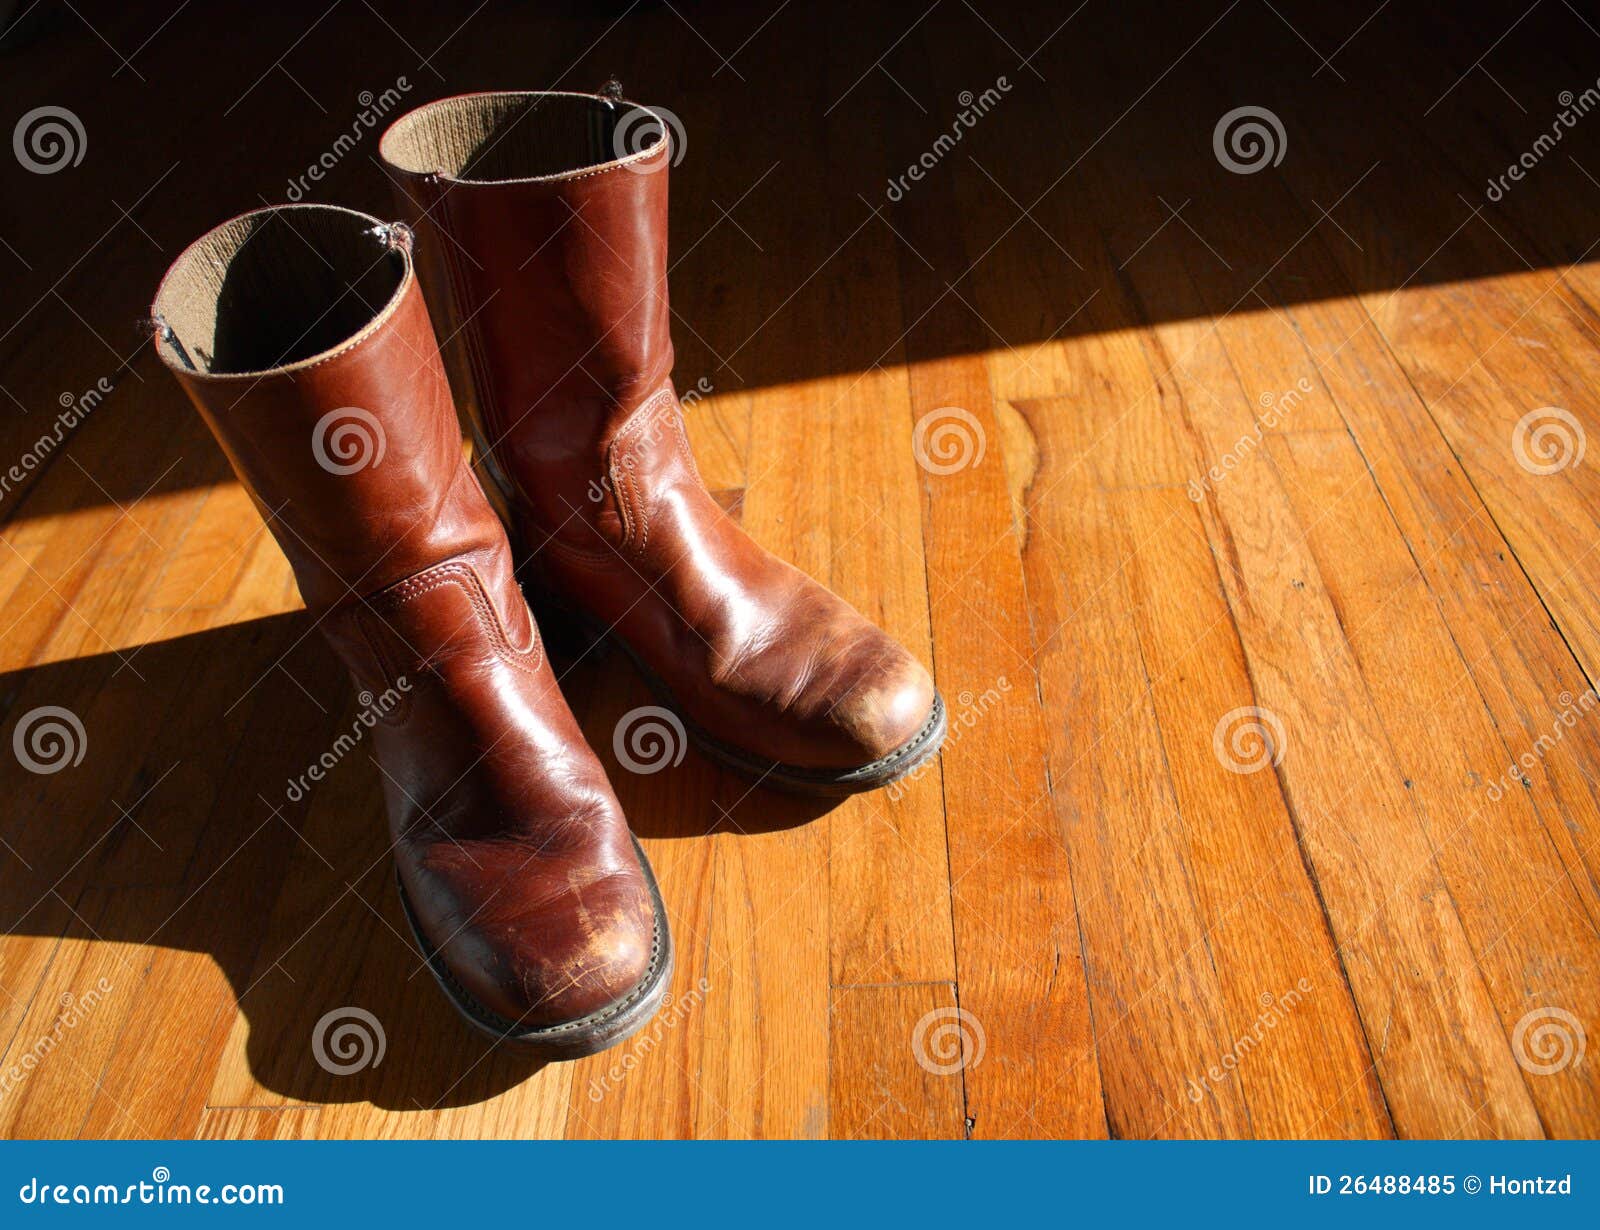 Worn brown leather boots stock image. Image of sole, worn - 26488485